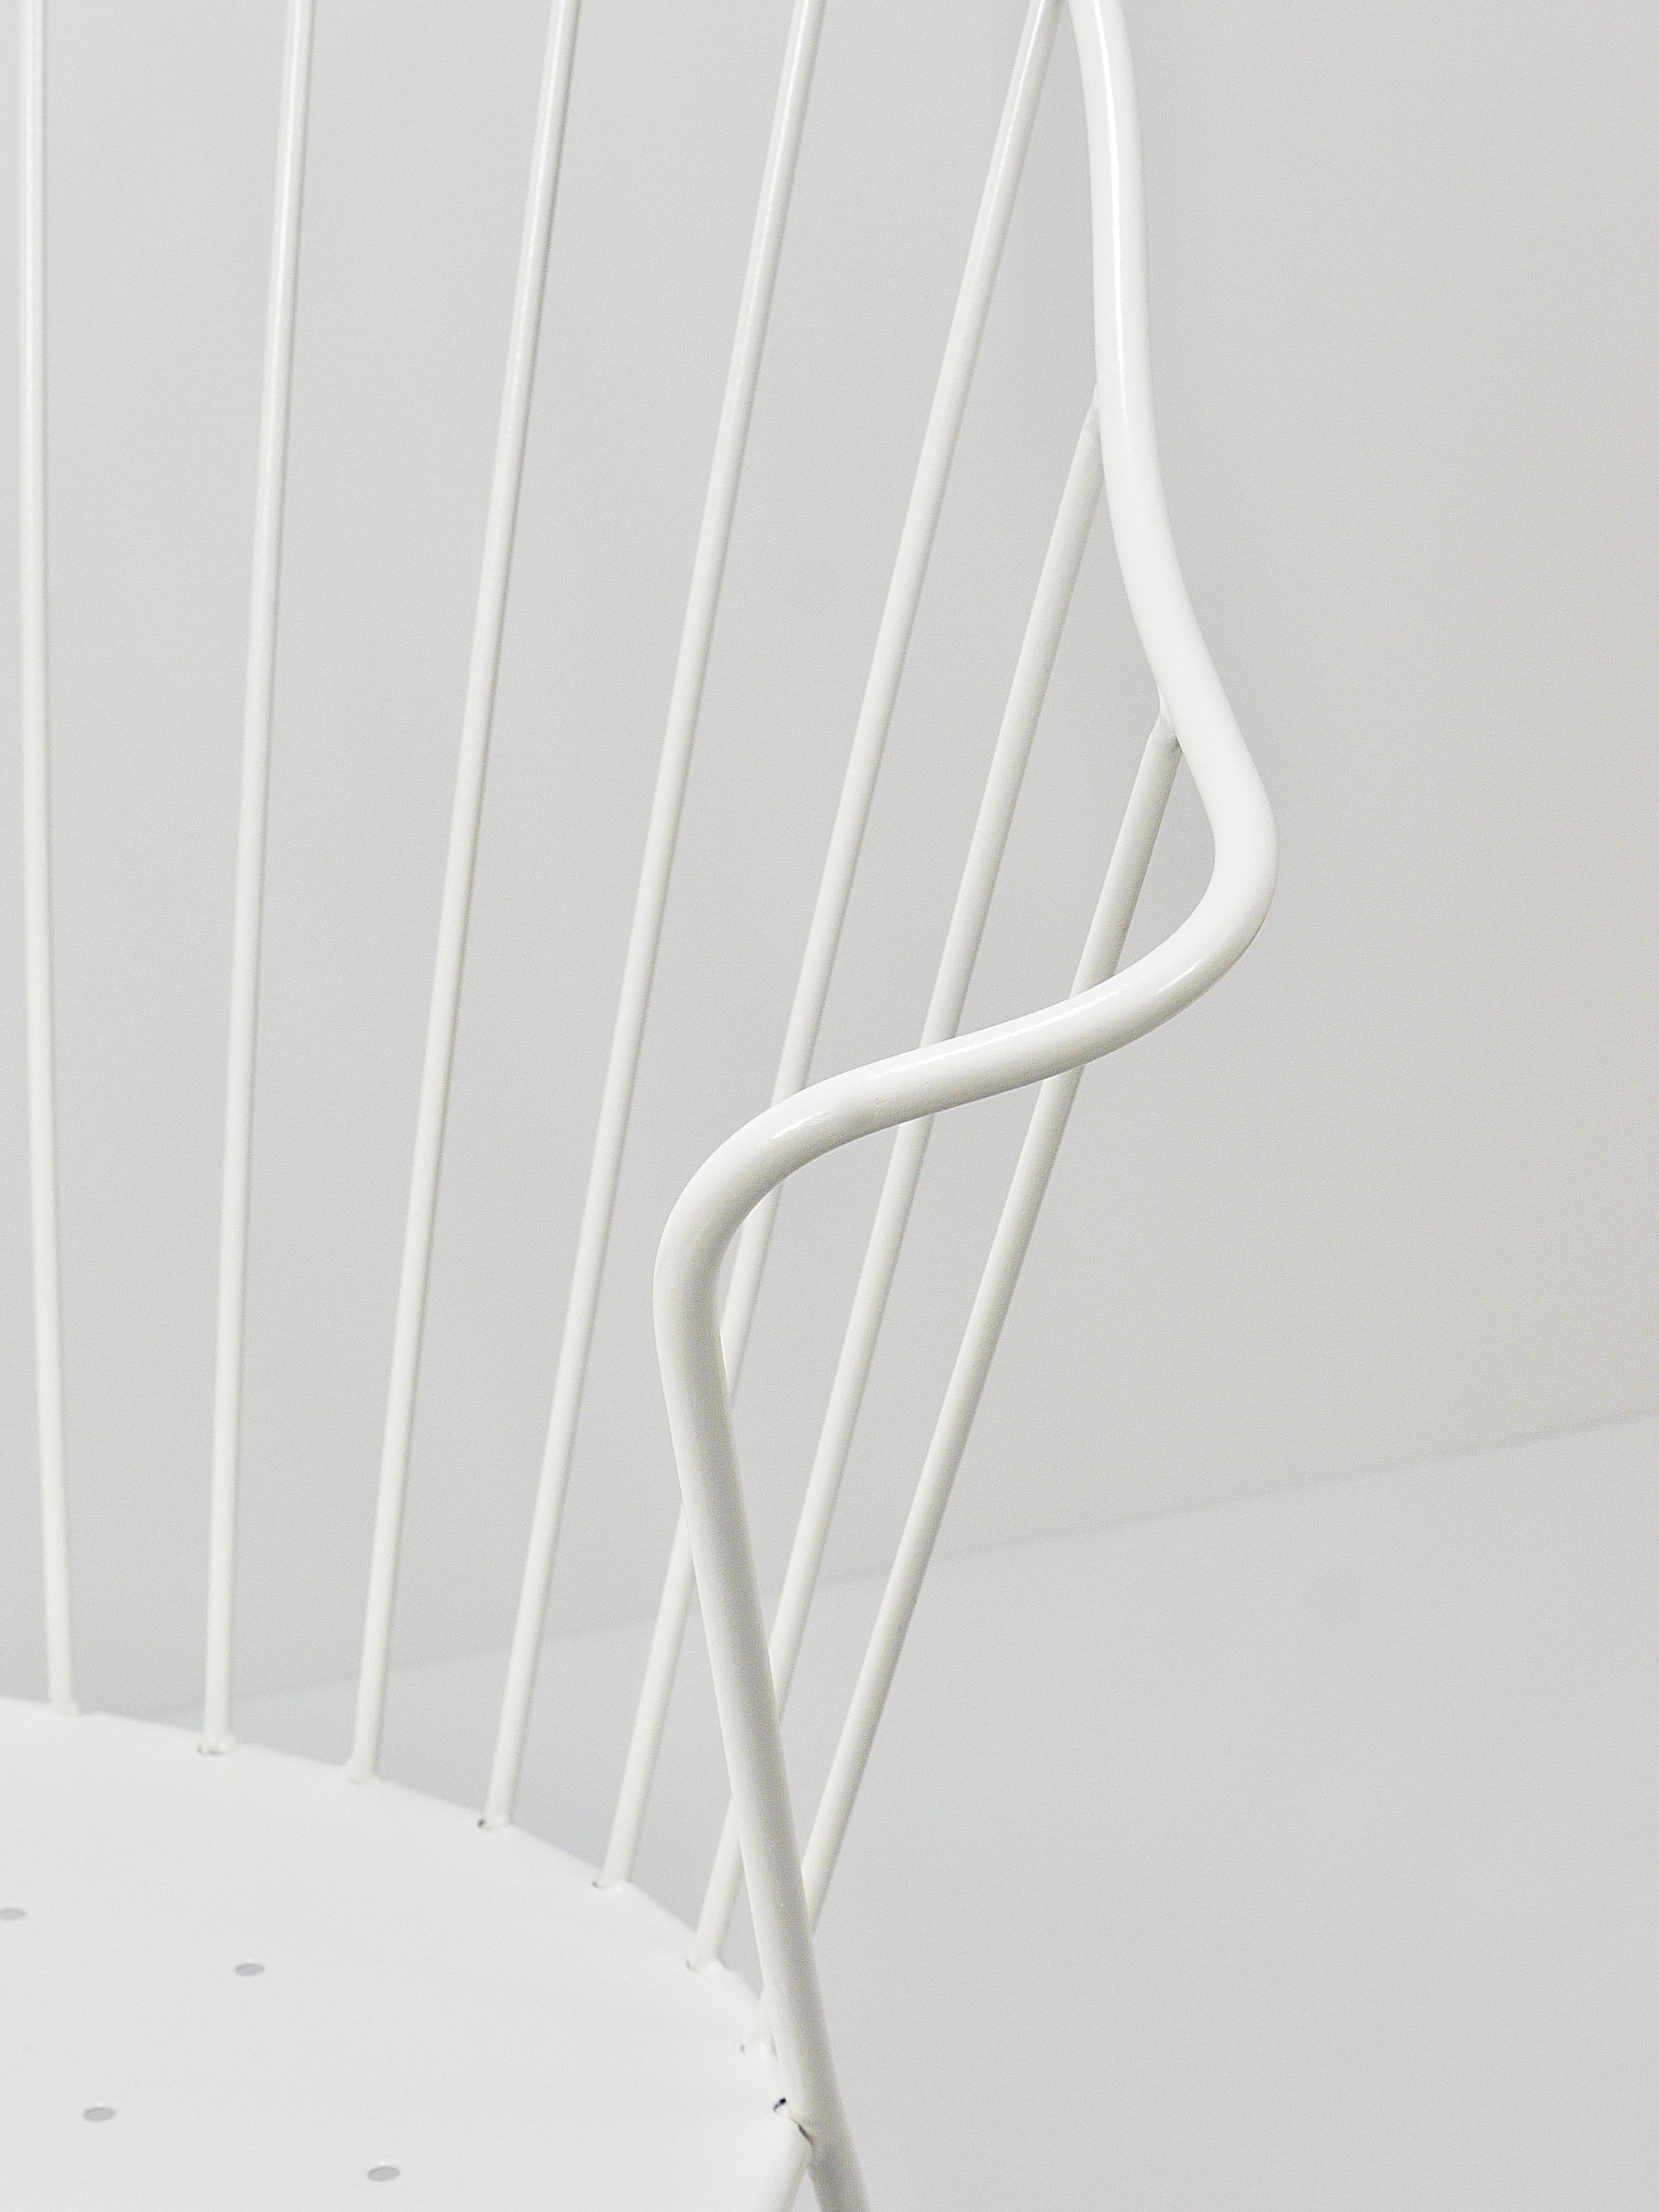 A lovely Sonett „Auersperg“ wire chair or side chair in white from the 1950s, designed by by the Austrian Midcentury Architects J.O. Wladar and V. Mödlhammer, executed by Karl Fostel Sen.'s Erben, Vienna, Austria. Made of white painted curved metal